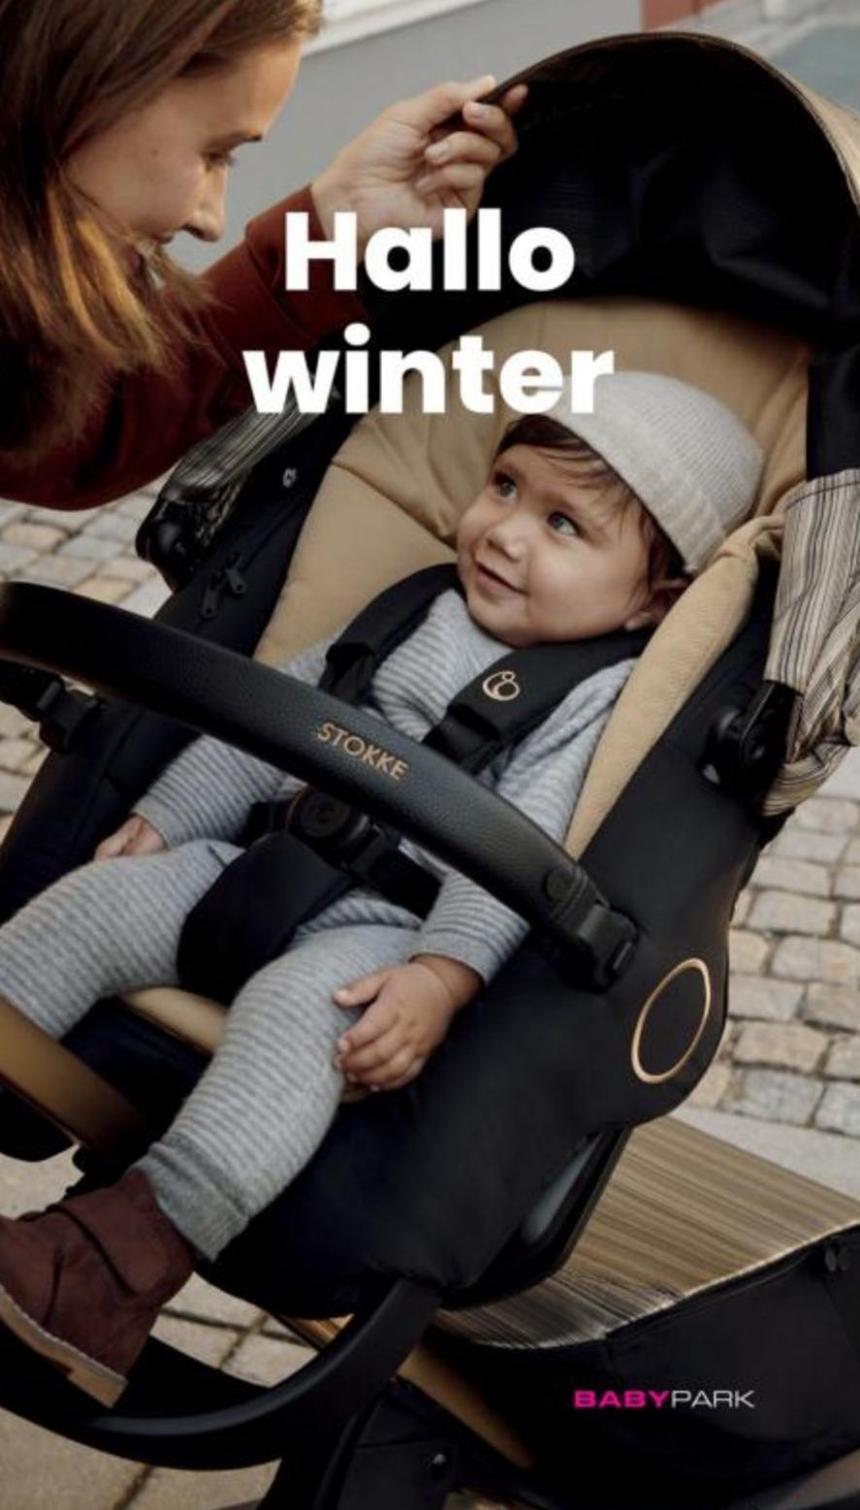 Babypark - Winter items online. Page 1